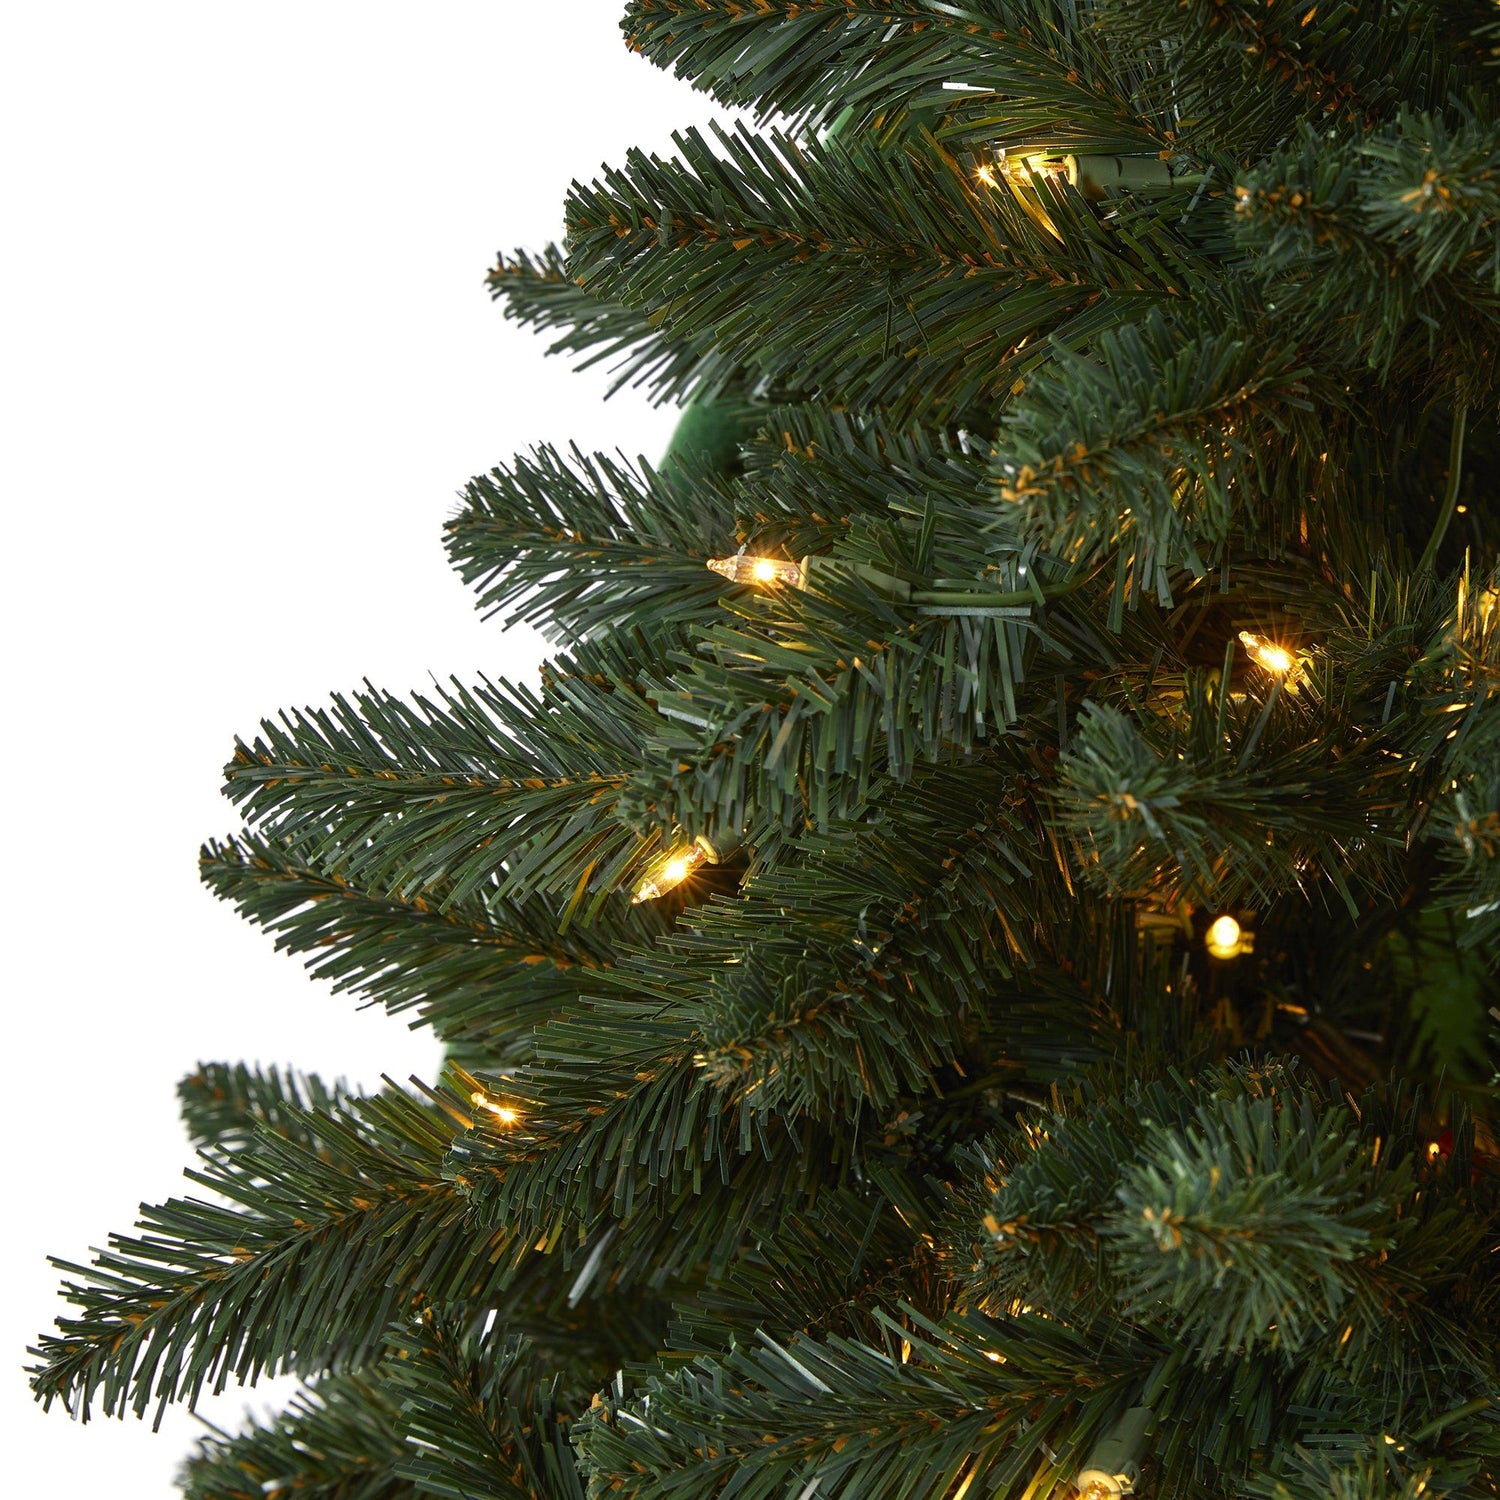 6’ Northern Rocky Spruce Artificial Christmas Tree with 300 Clear Lights and 838 Bendable Branches